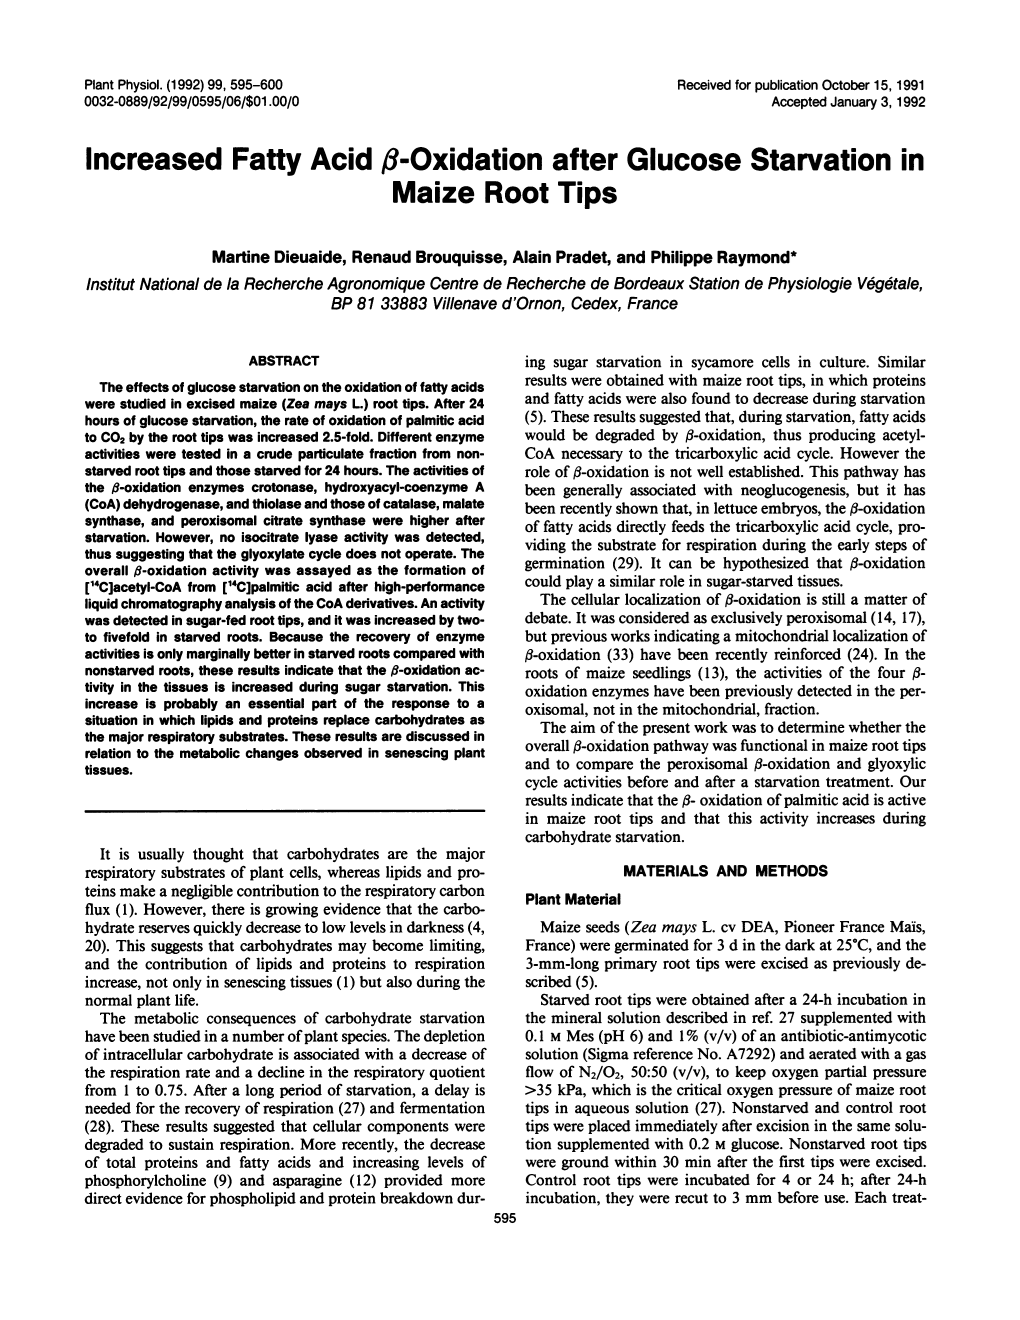 Increased Fatty Acid A-Oxidation After Glucose Starvation in Maize Root Tips